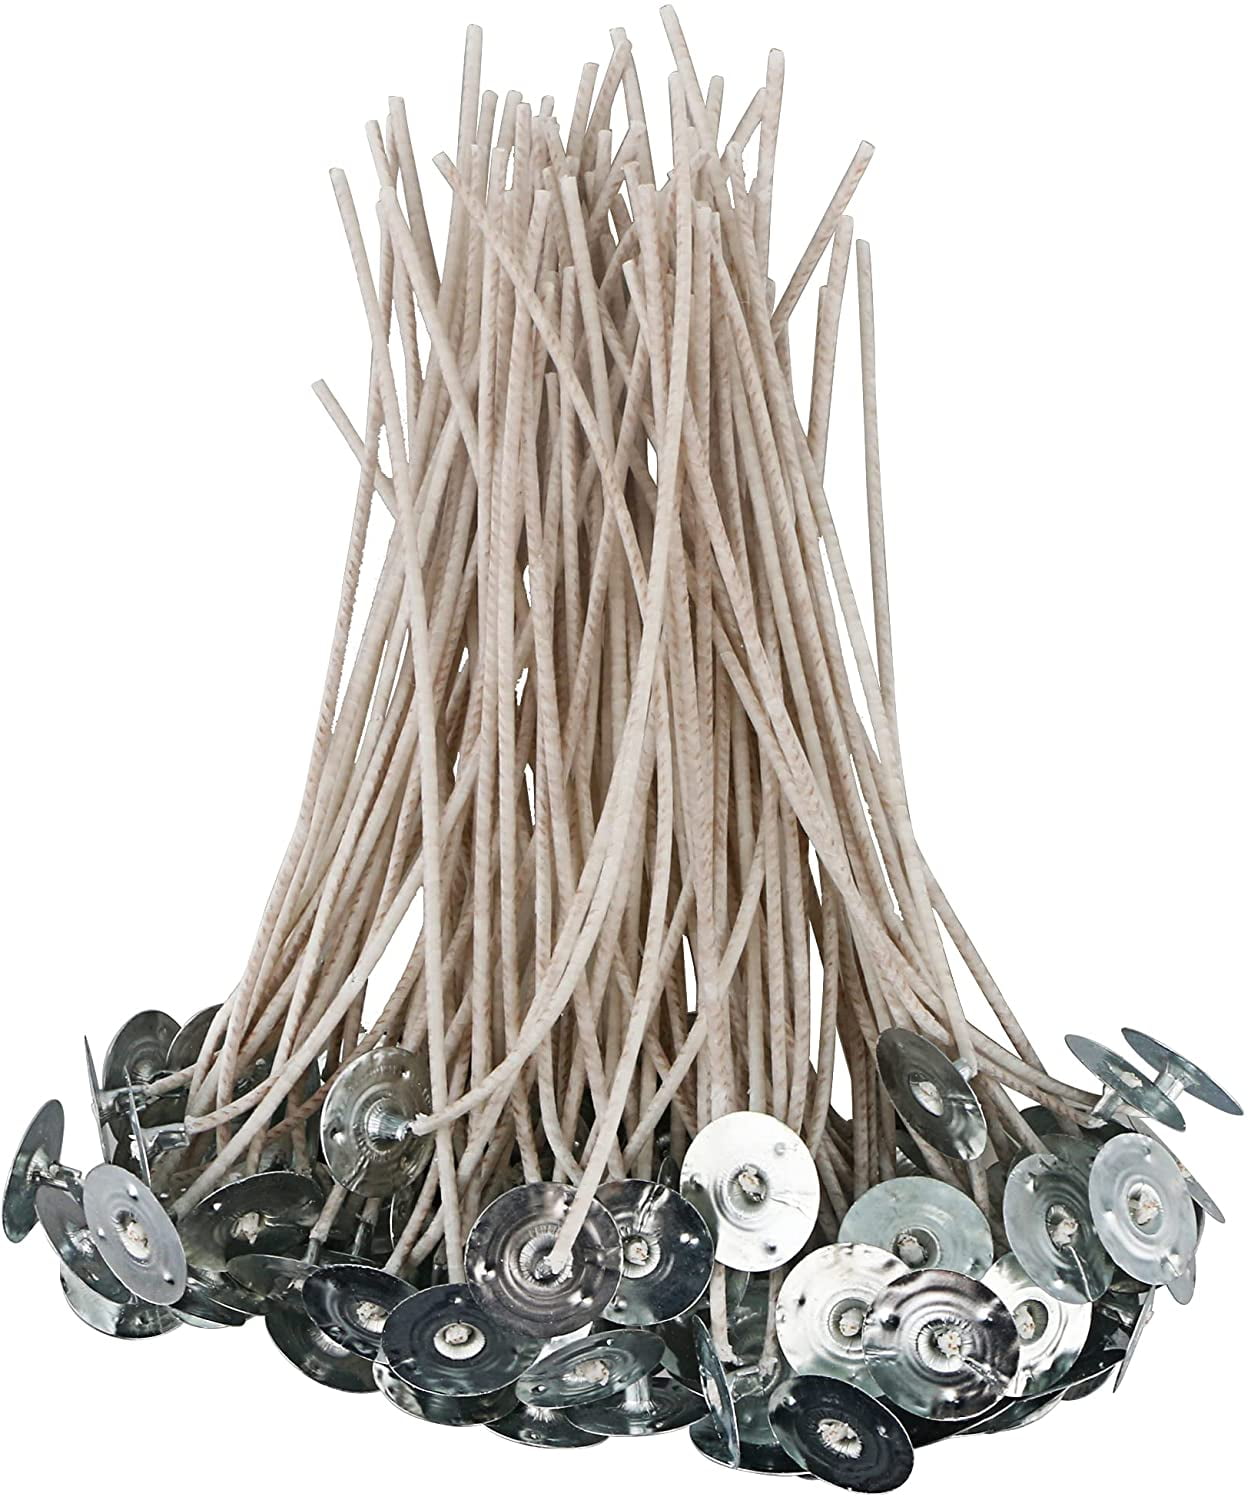 Candle Wick 8 Inch at Rs 100/pack, Wicks For Candles in Mumbai